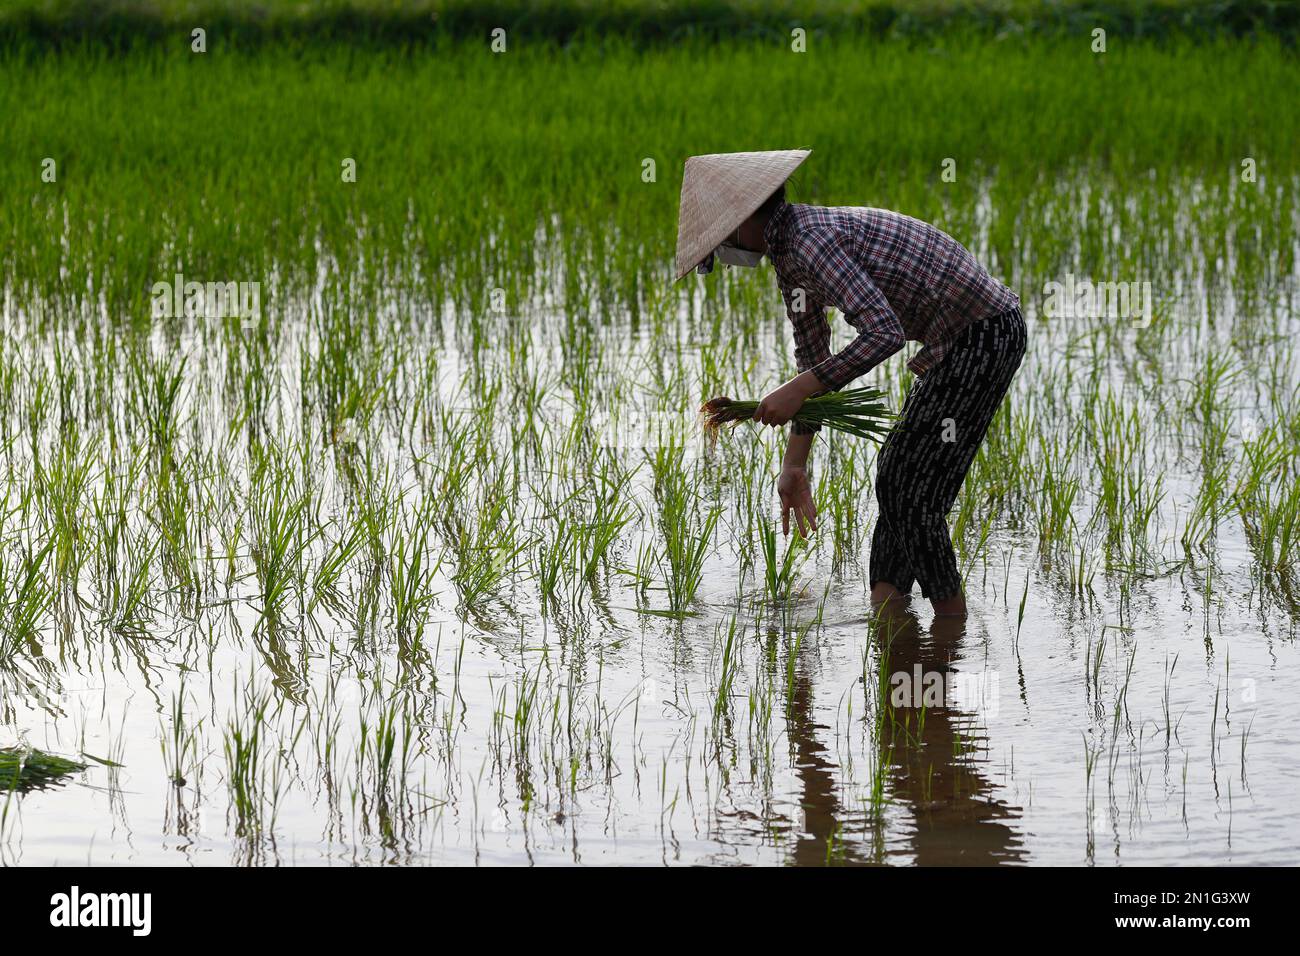 Silhouette of an Asian woman planting rice seedlings in a paddy field, agriculture, Hoi An, Vietnam, Indochina, Southeast Asia, Asia Stock Photo